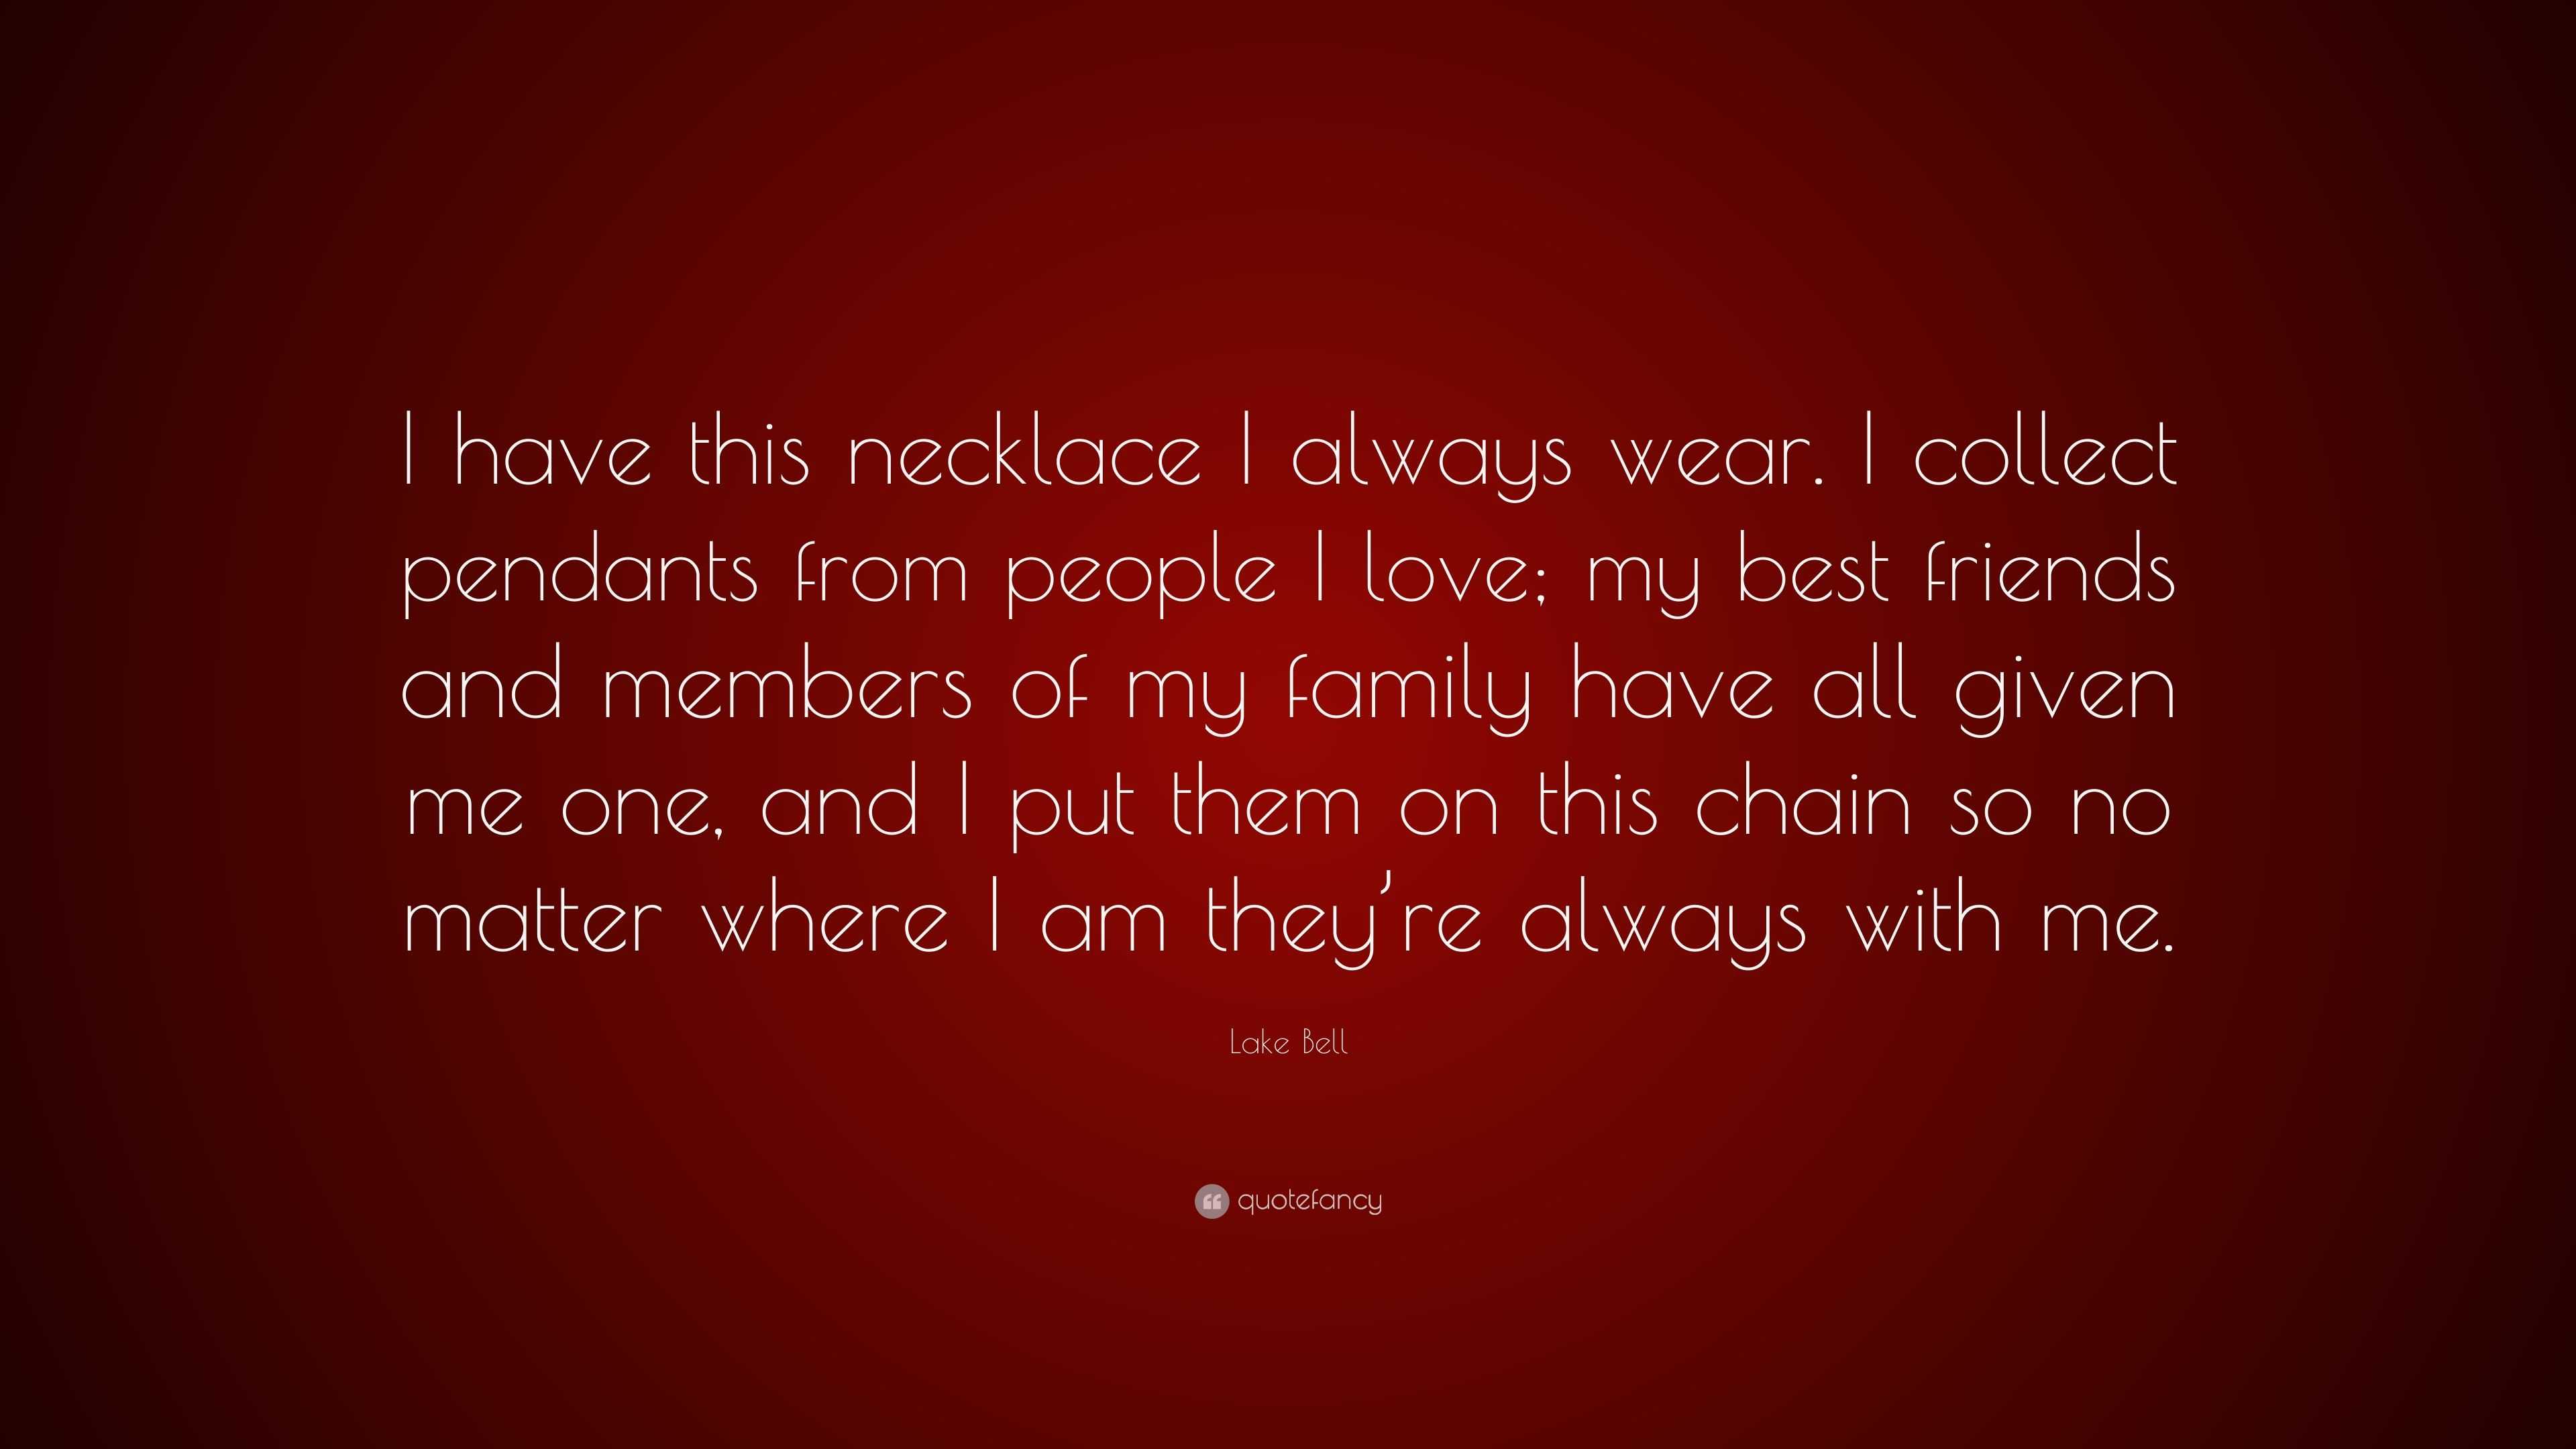 Lake Bell Quote “I have this necklace I always wear I collect pendants